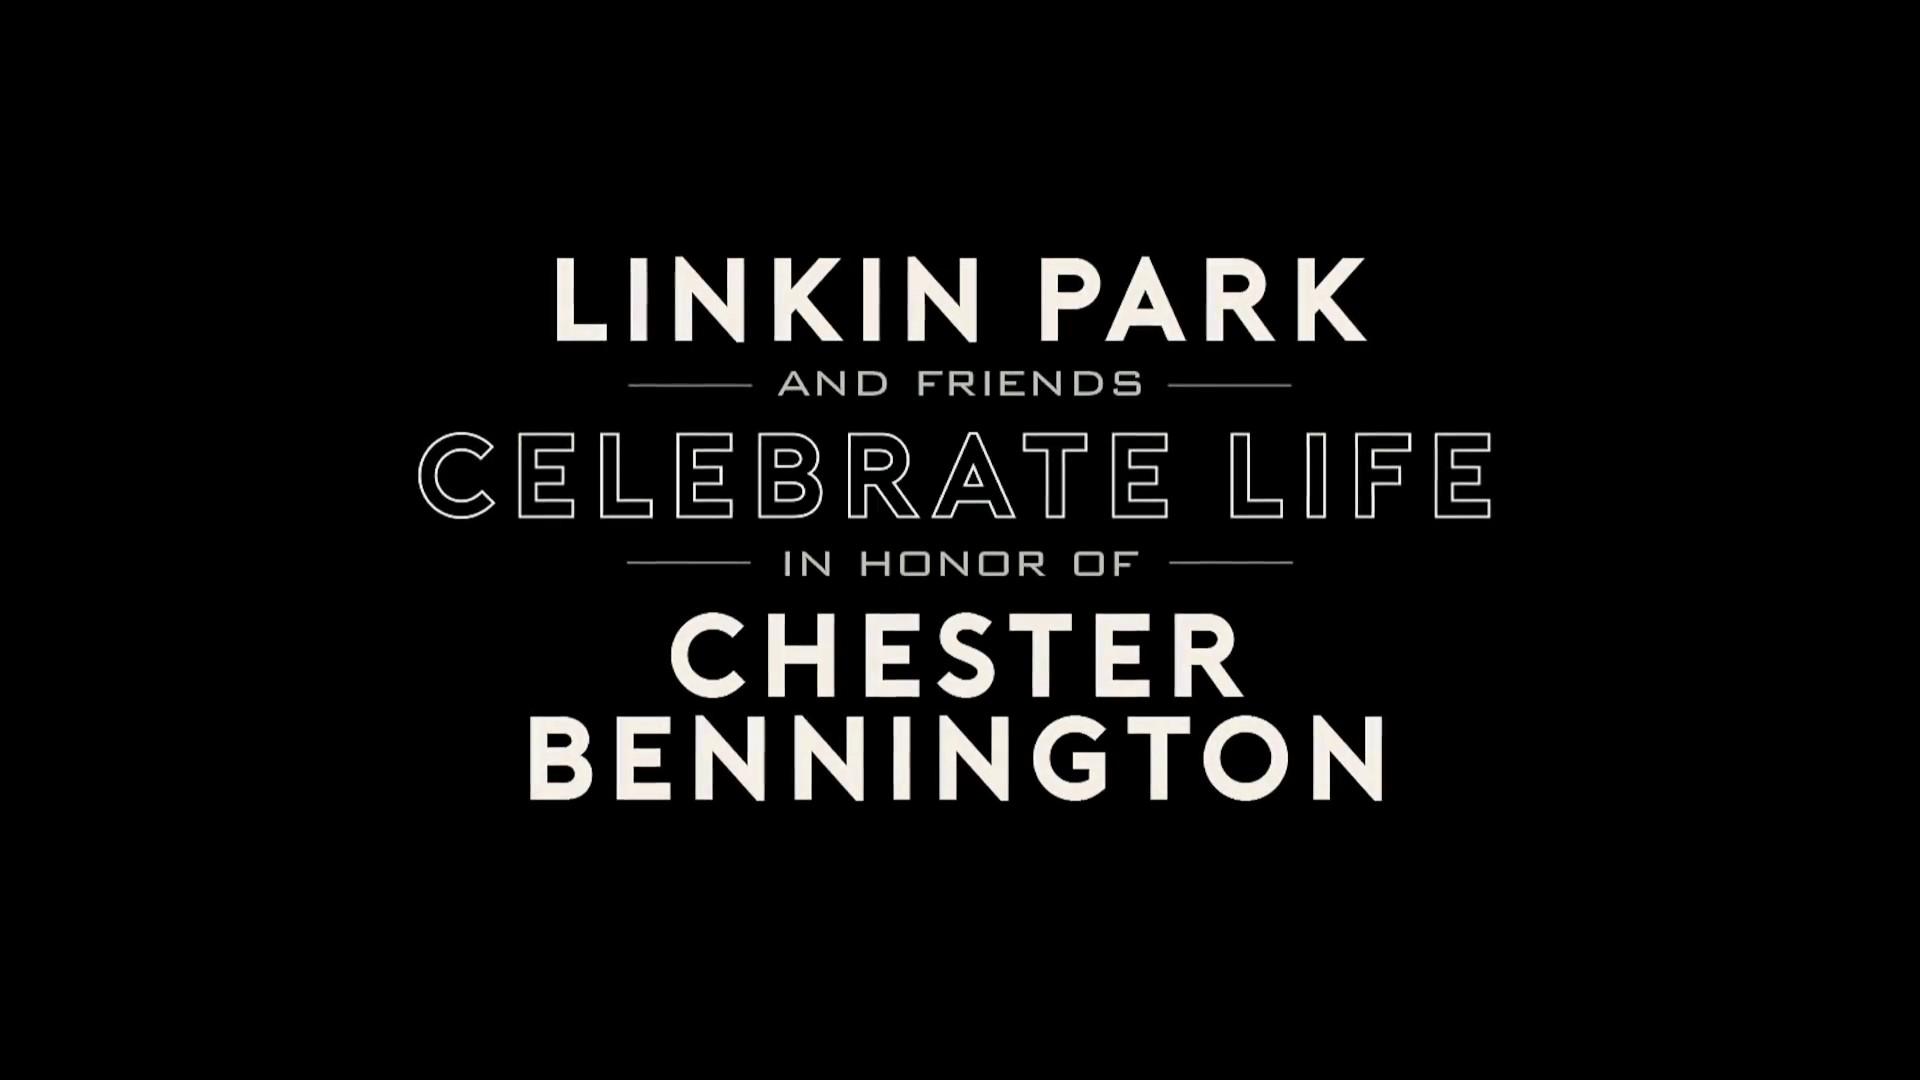 Linkin Park and Friends: Celebrate Life in Honor of Chester Bennington